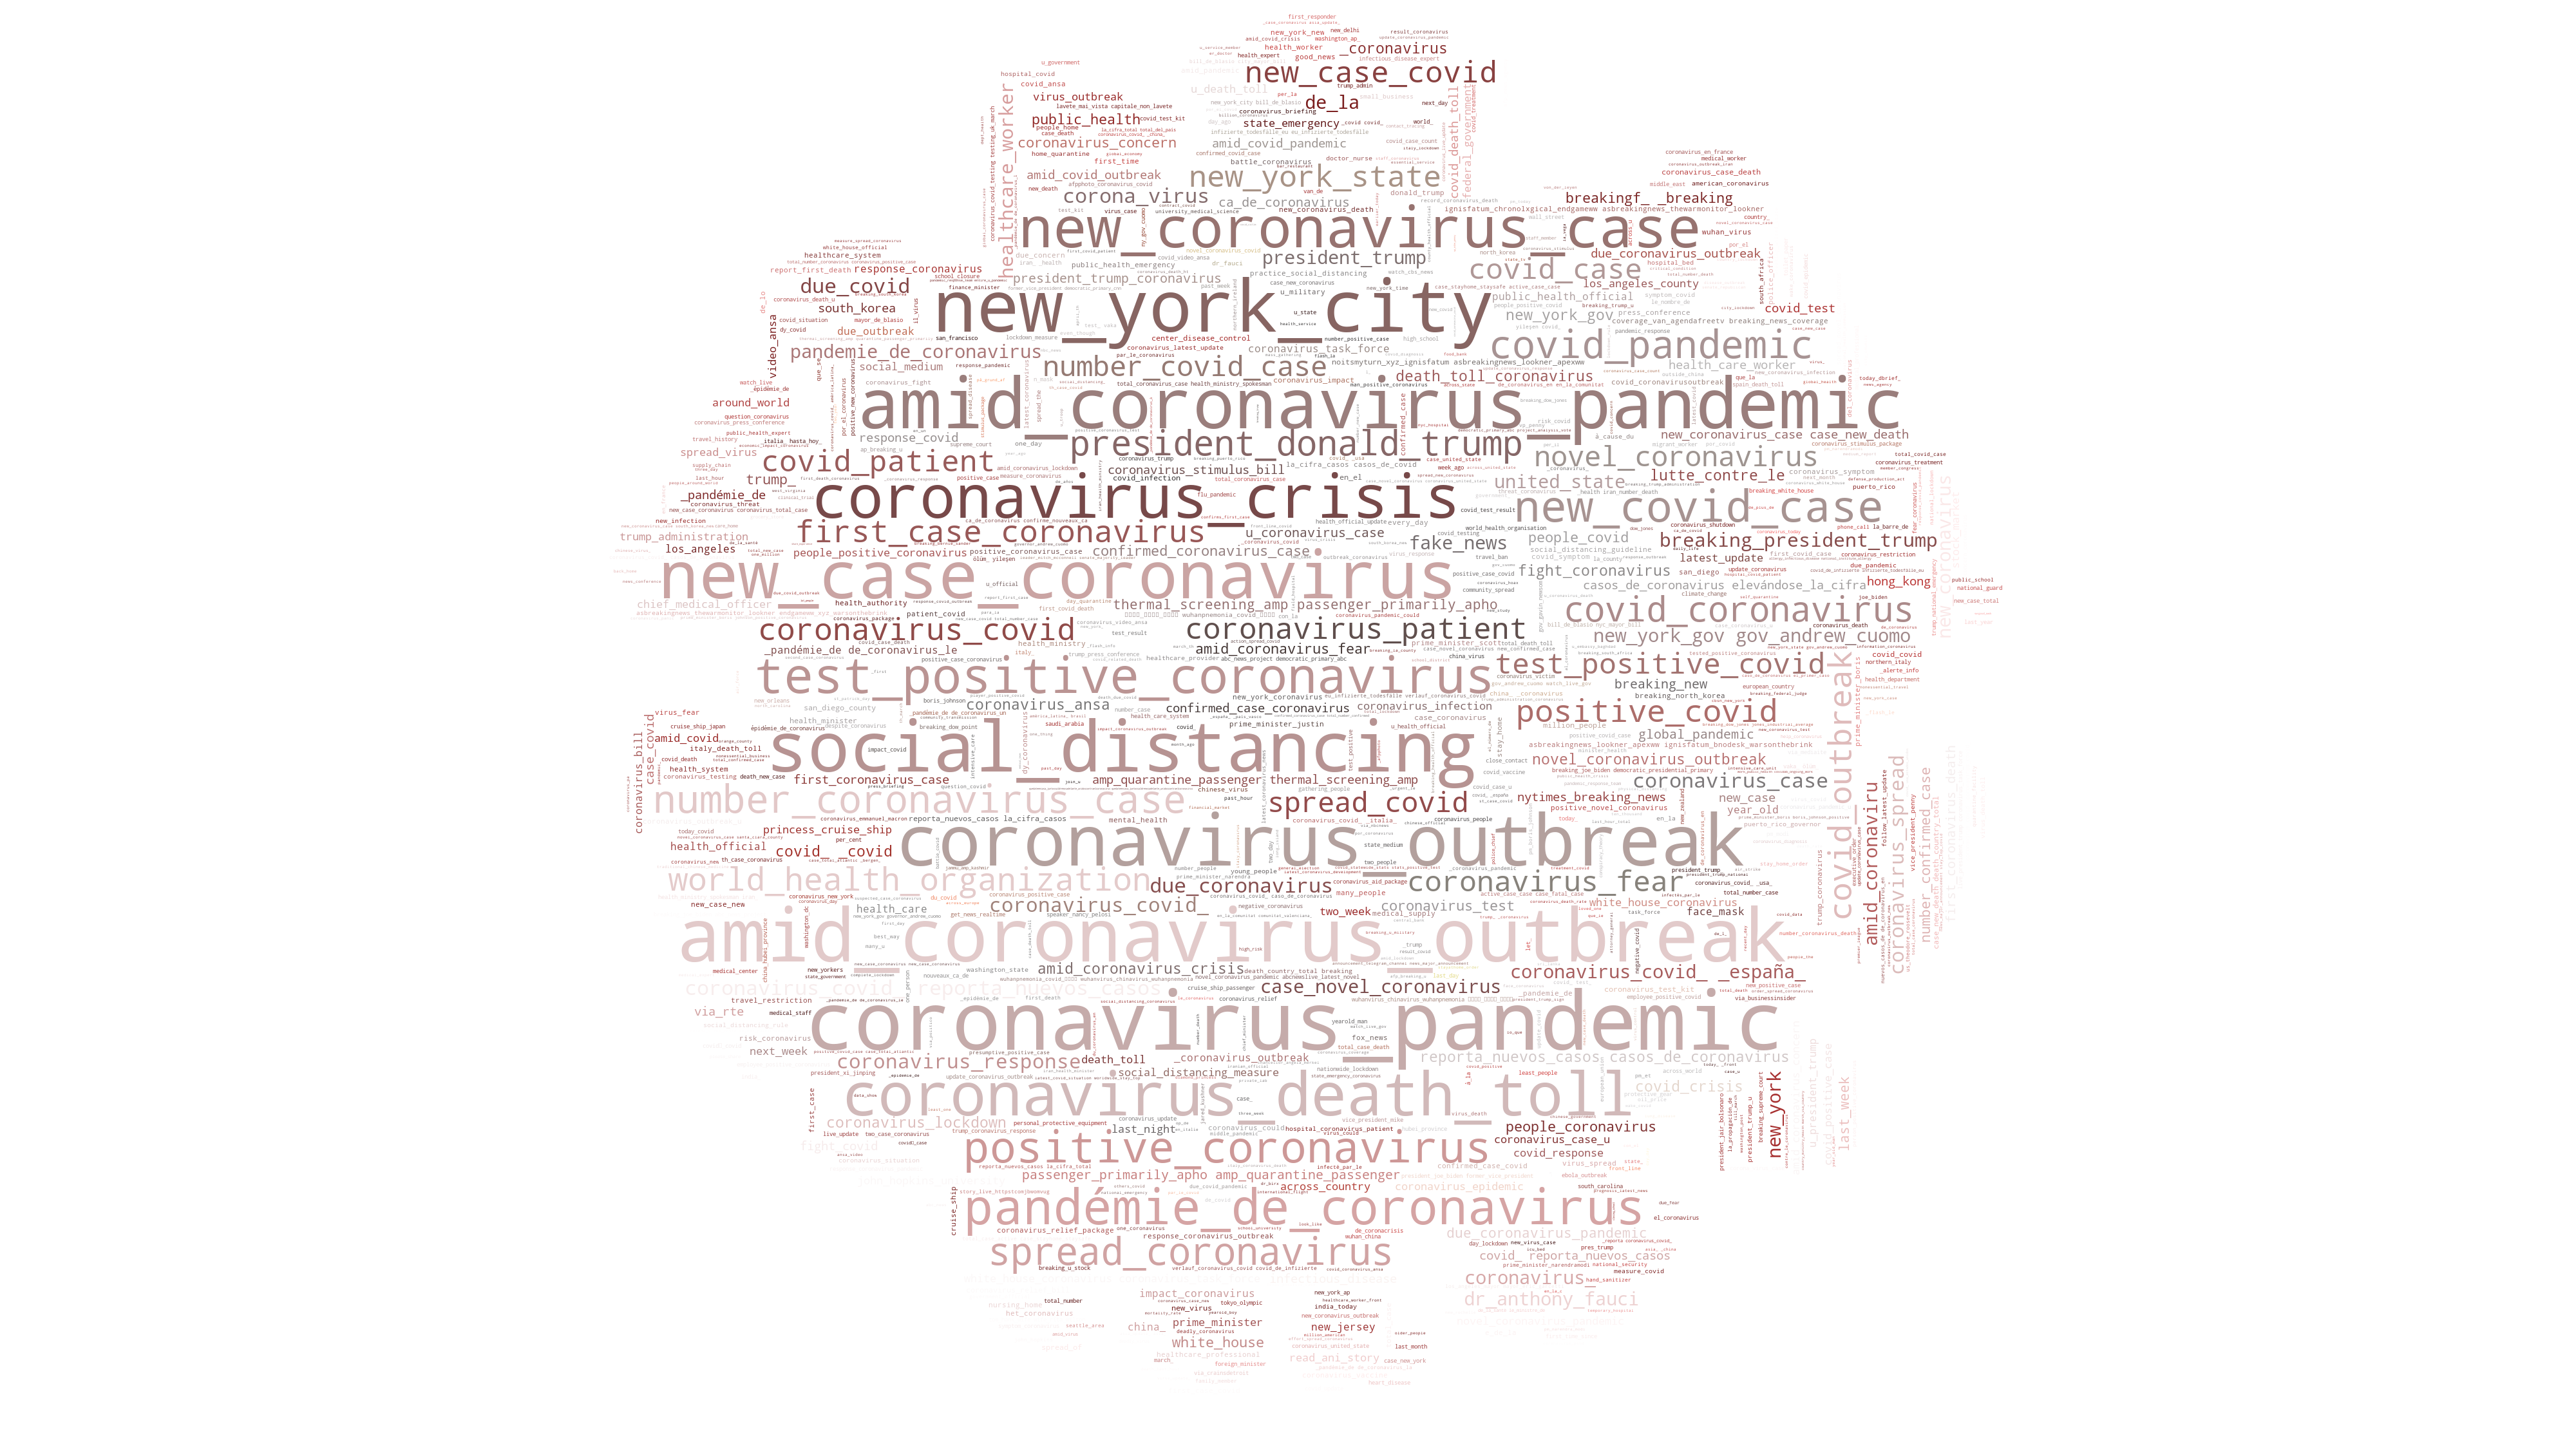 Word cloud from tweets about COVID-19